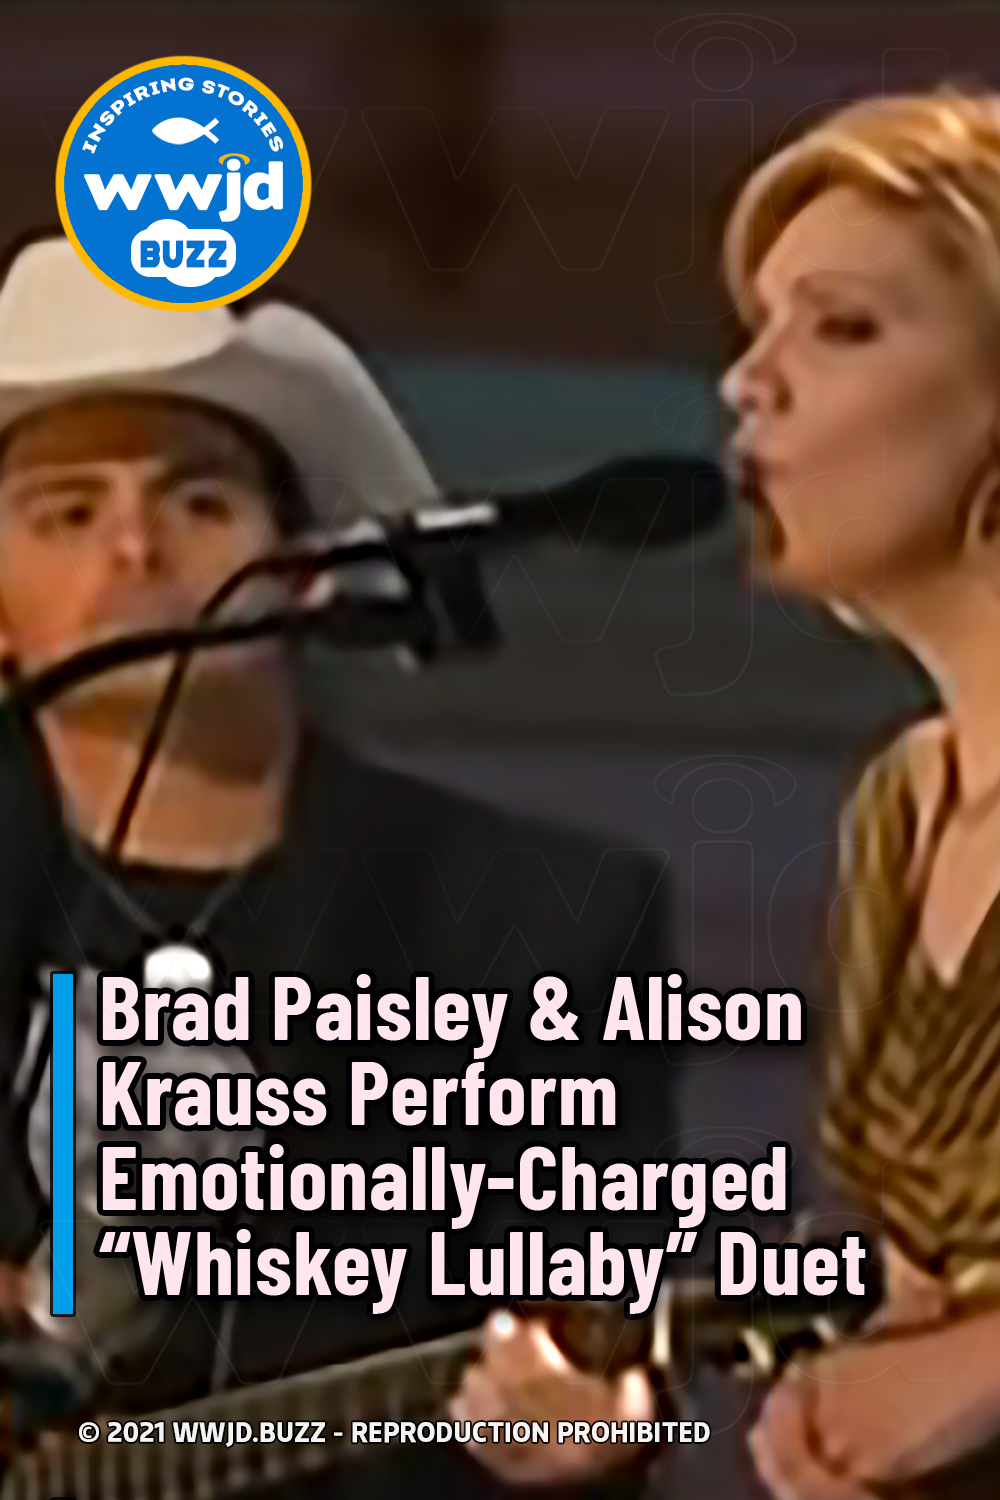 Brad Paisley & Alison Krauss Perform Emotionally-Charged “Whiskey Lullaby” Duet